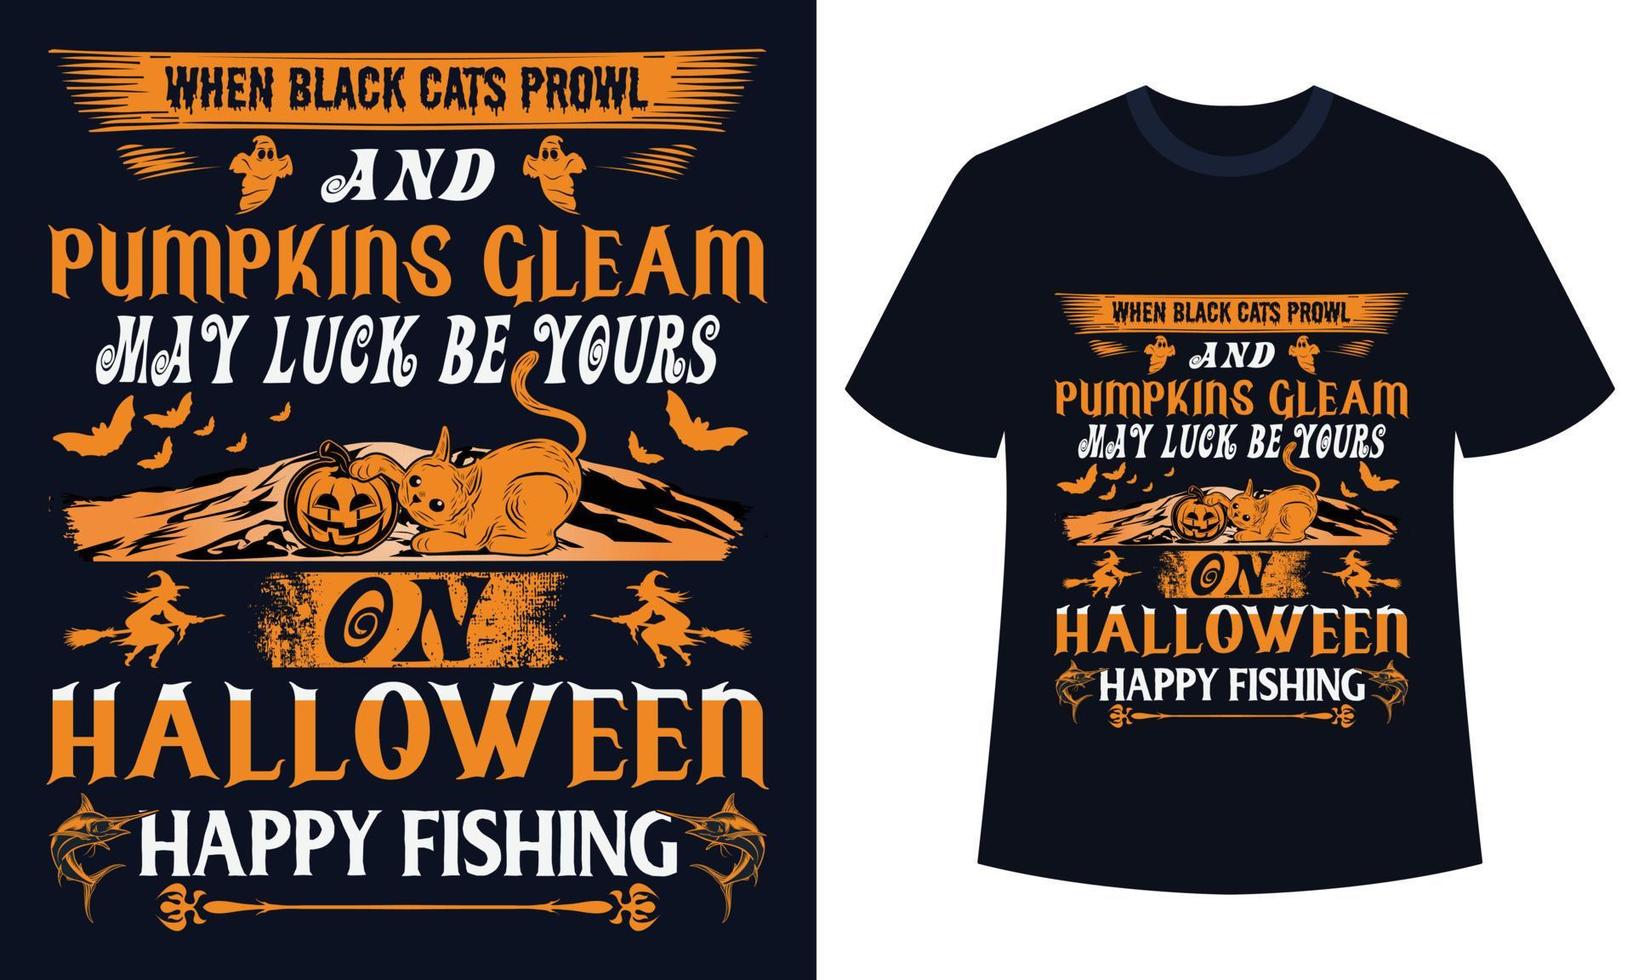 Amazing Halloween t-shirt Design  When Black Cats Prowl And Pumpkins Gleam May Luck Be Yours On Halloween Happy Fishing vector